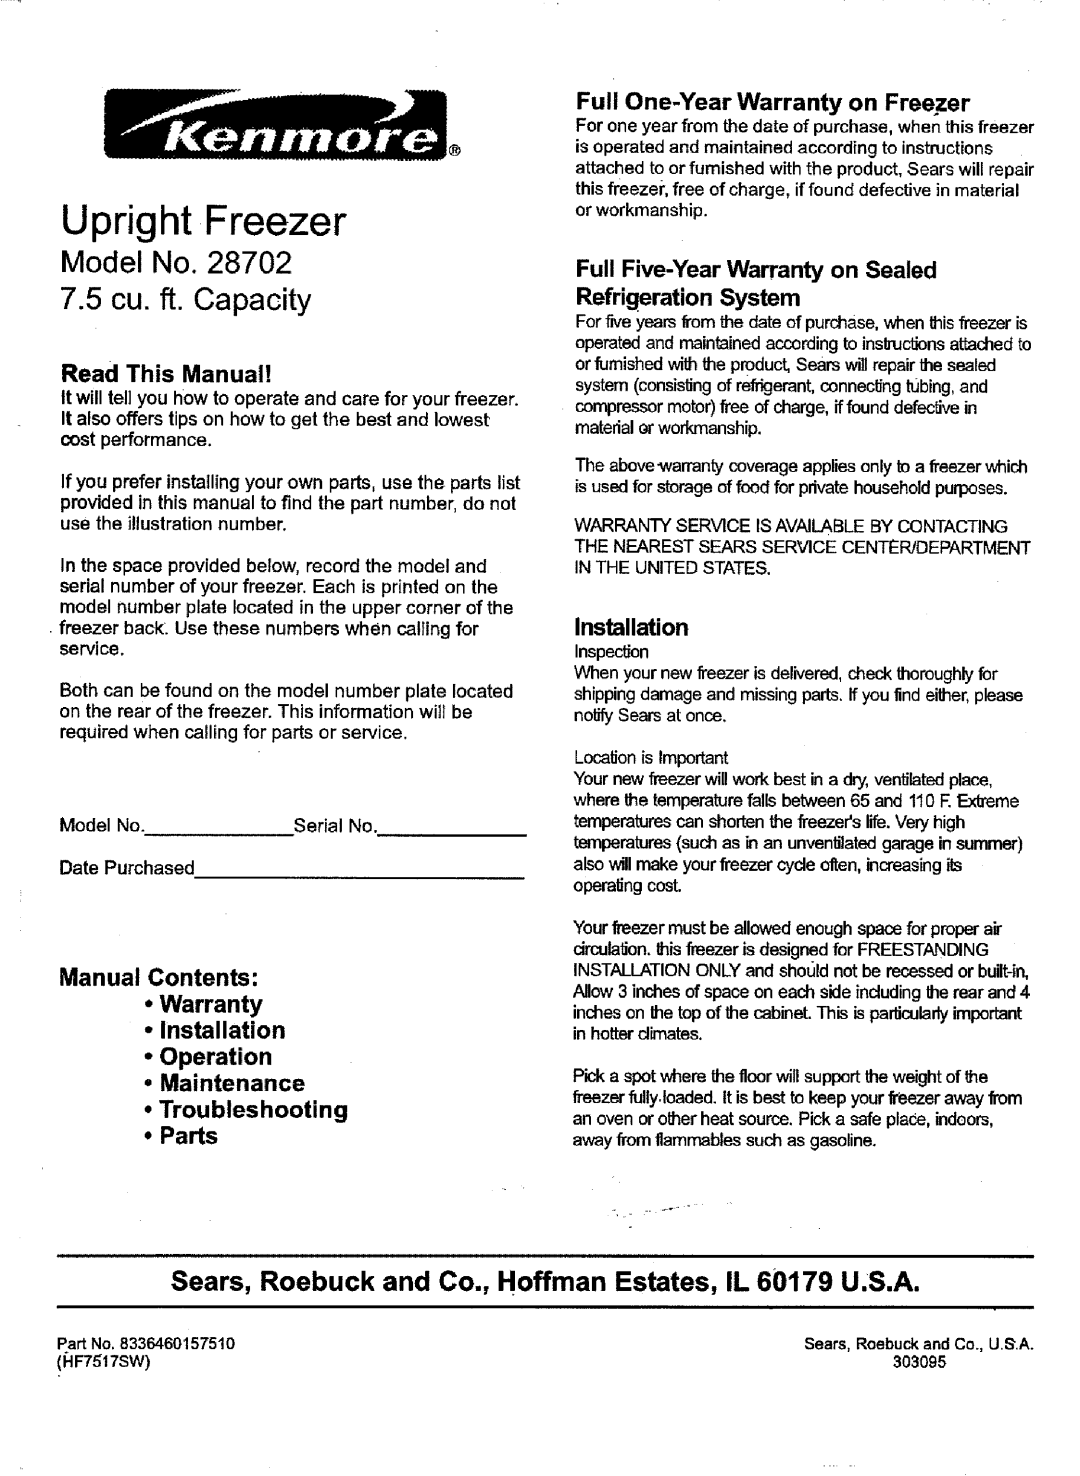 Kenmore HF7517SW, 28702 warranty Model No. 7.5 cu. ft. Capacity, Upright Freezer, Refrigeration System, Read This Manual 